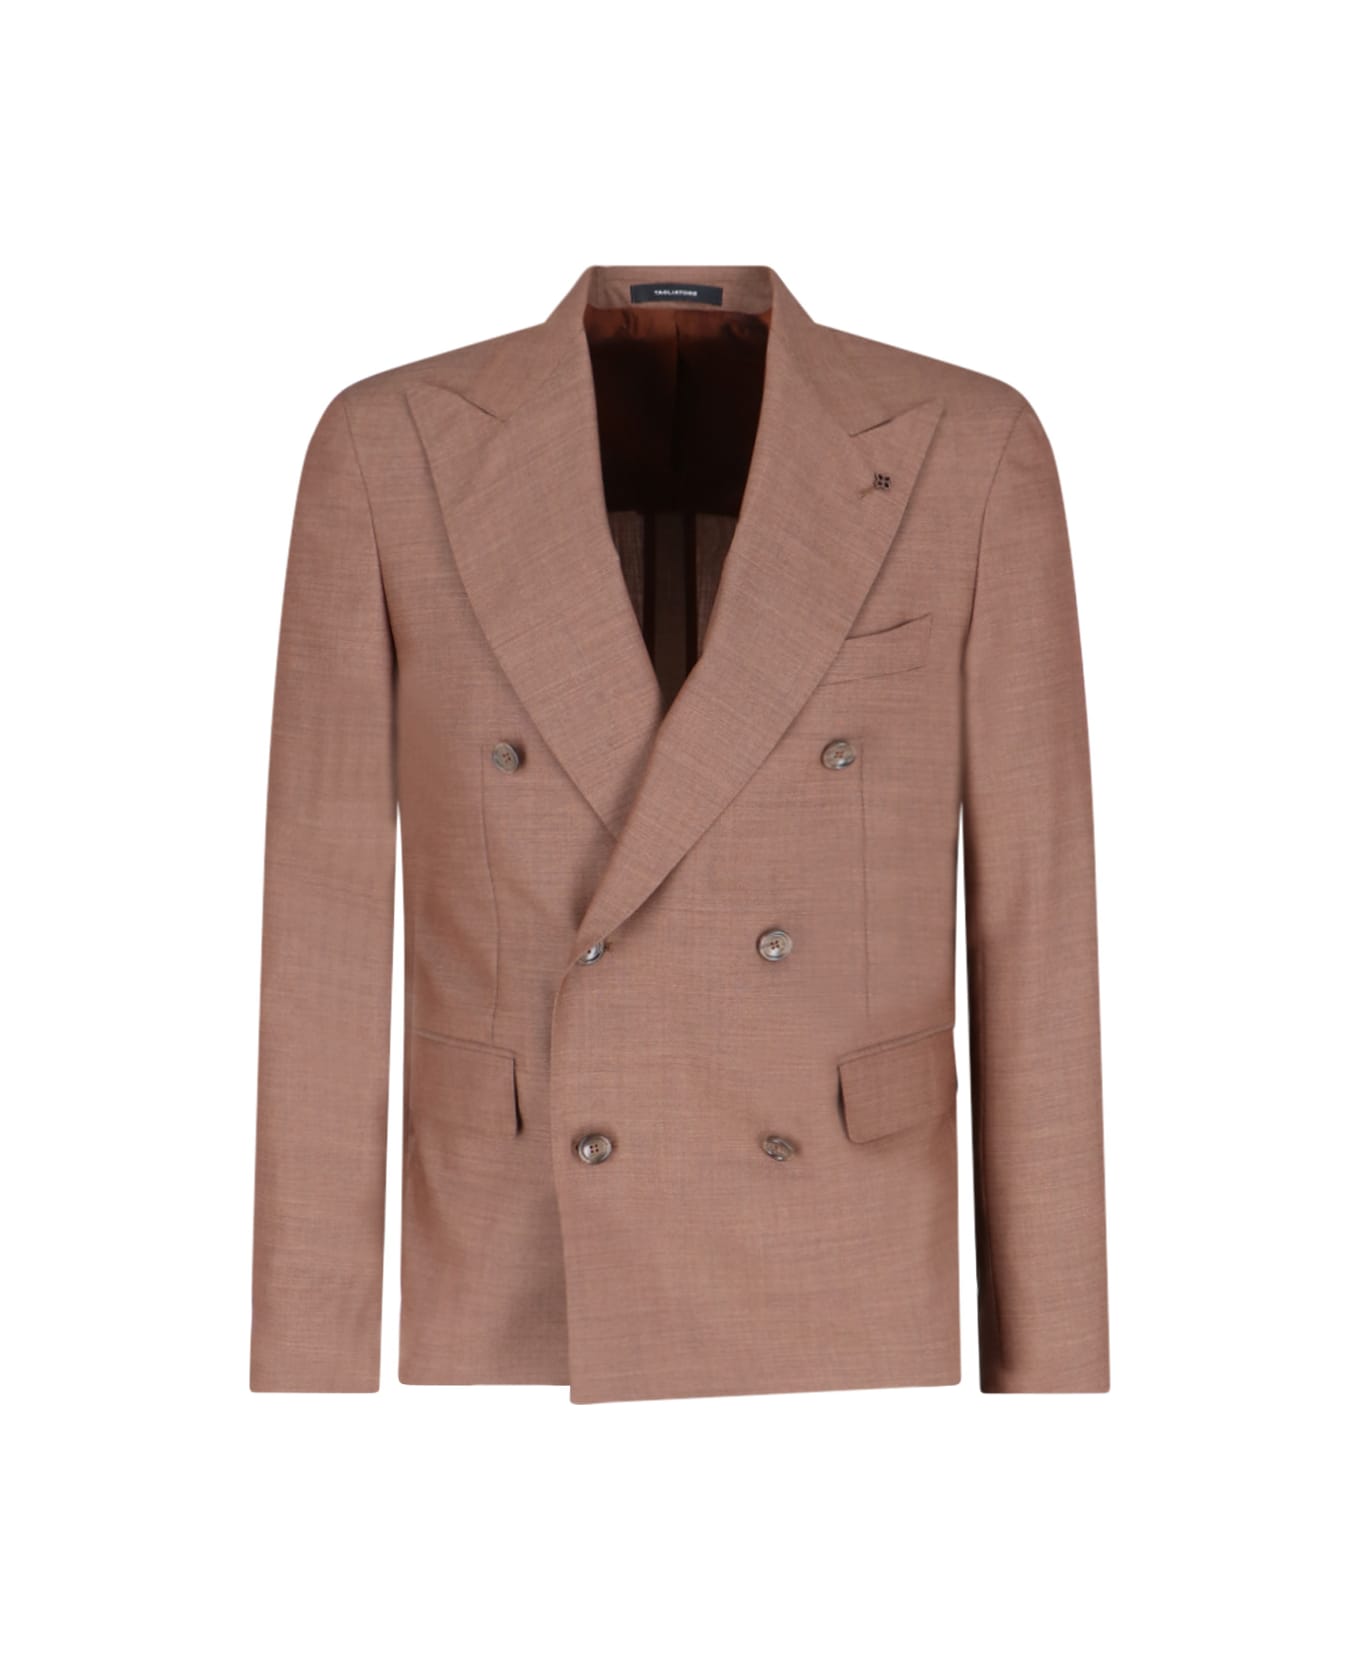 Tagliatore Double-breasted Suit - Brown